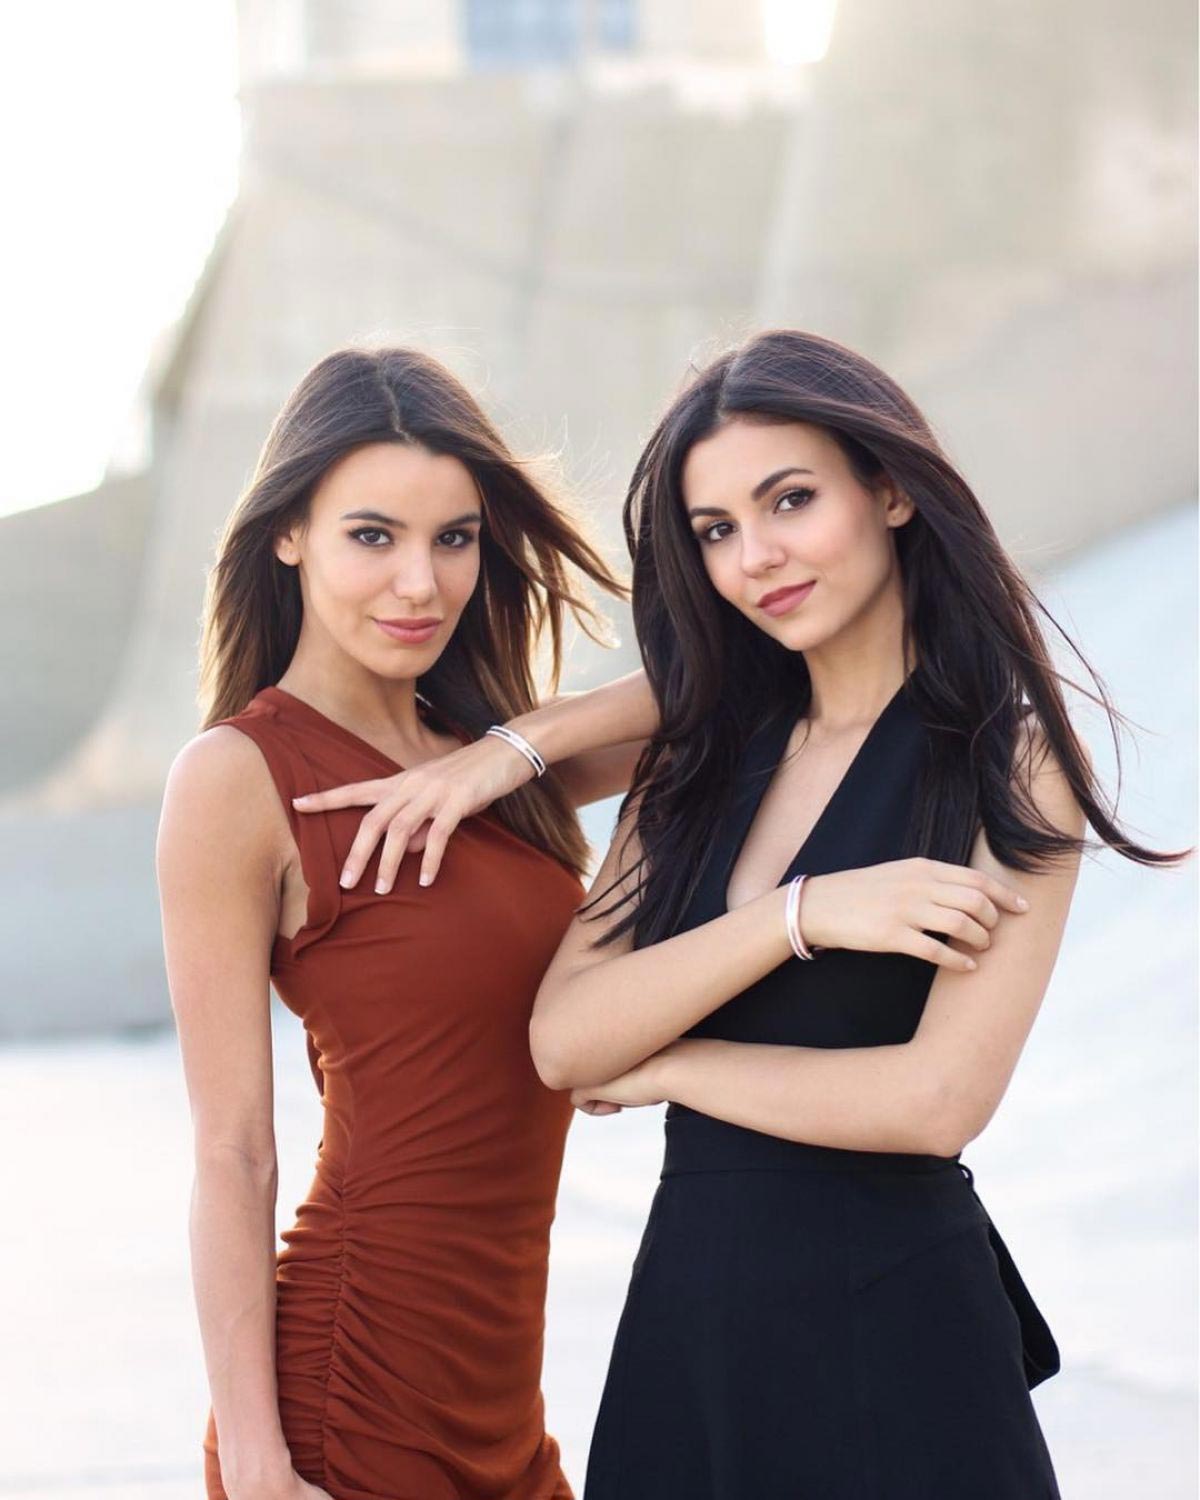 Victoria Justice and Madison Reed on the Set of a Photoshoot, November 2018